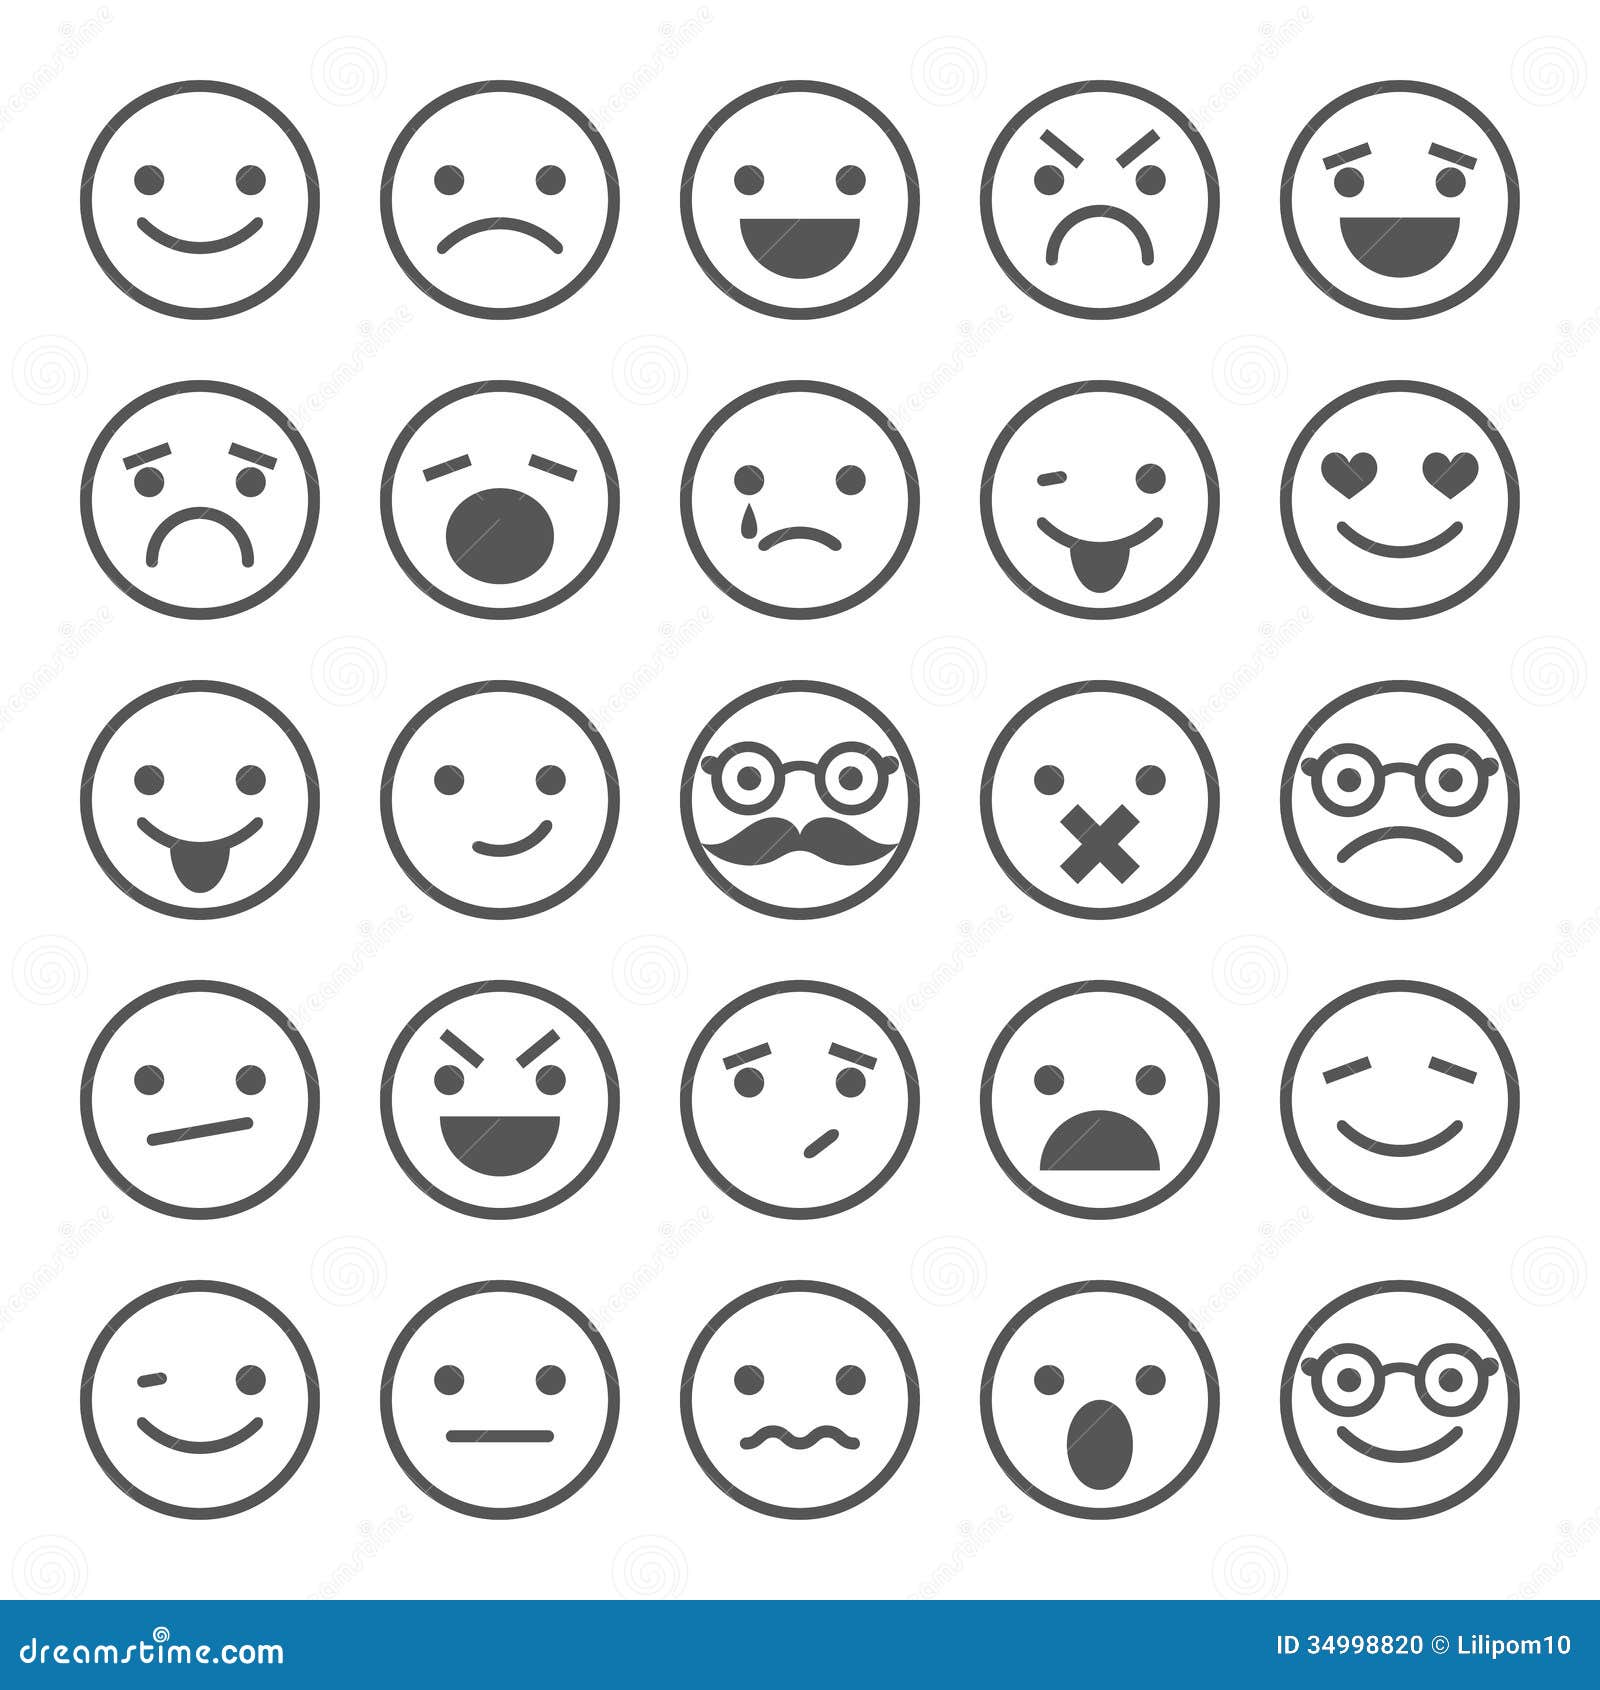 Different Emotion Smiley Faces